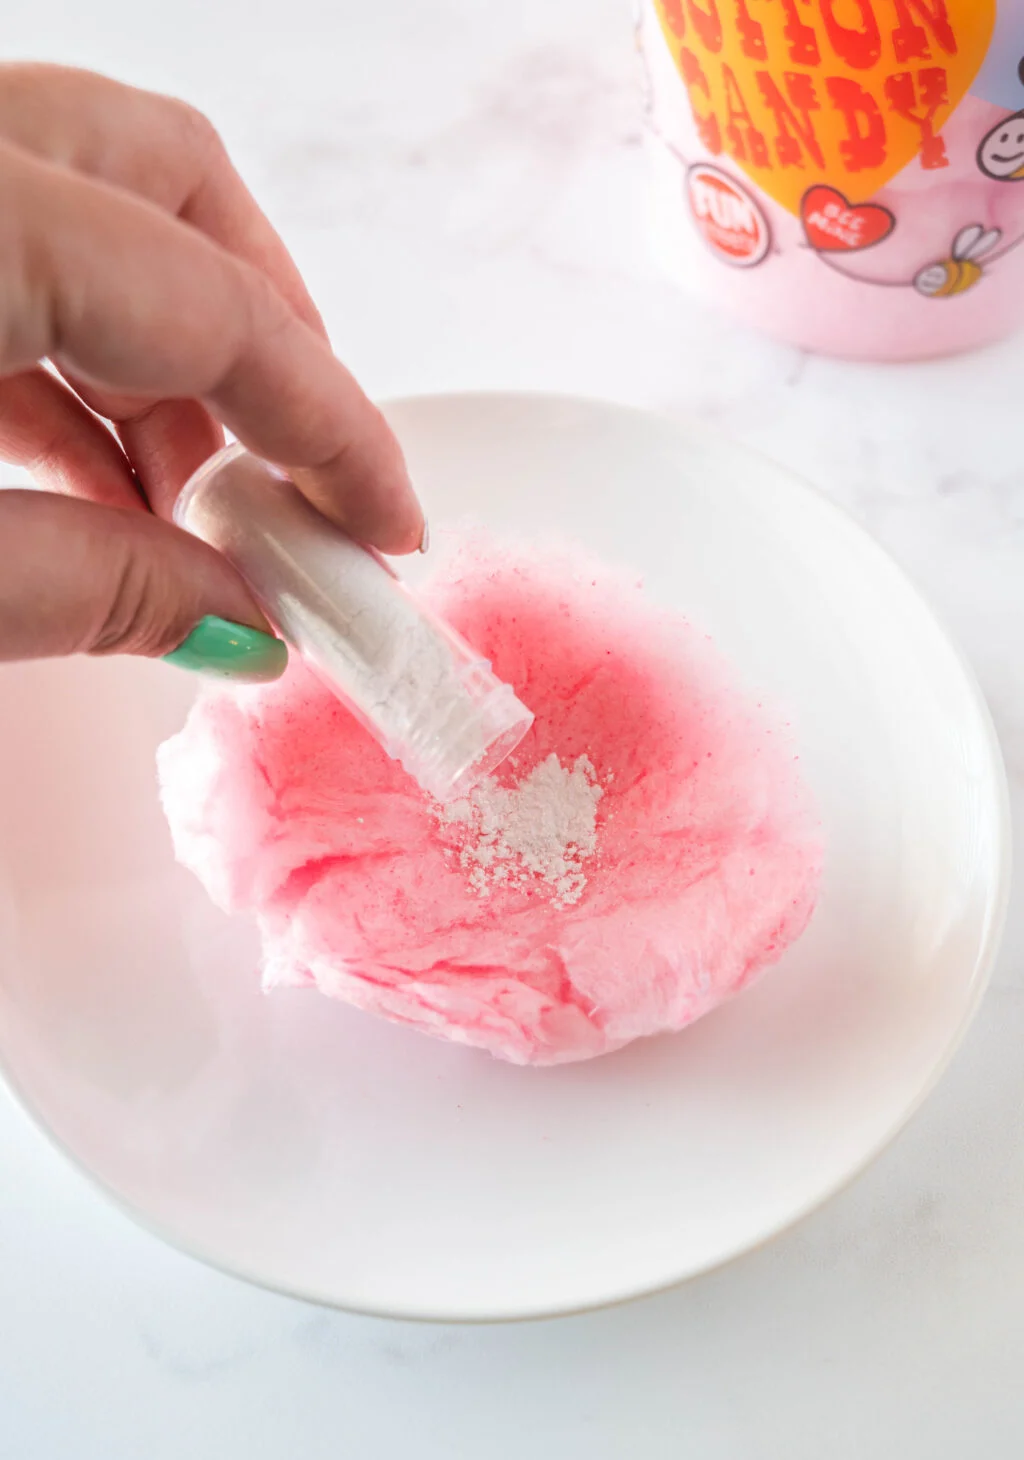 edible glitter being poured into cotton candy